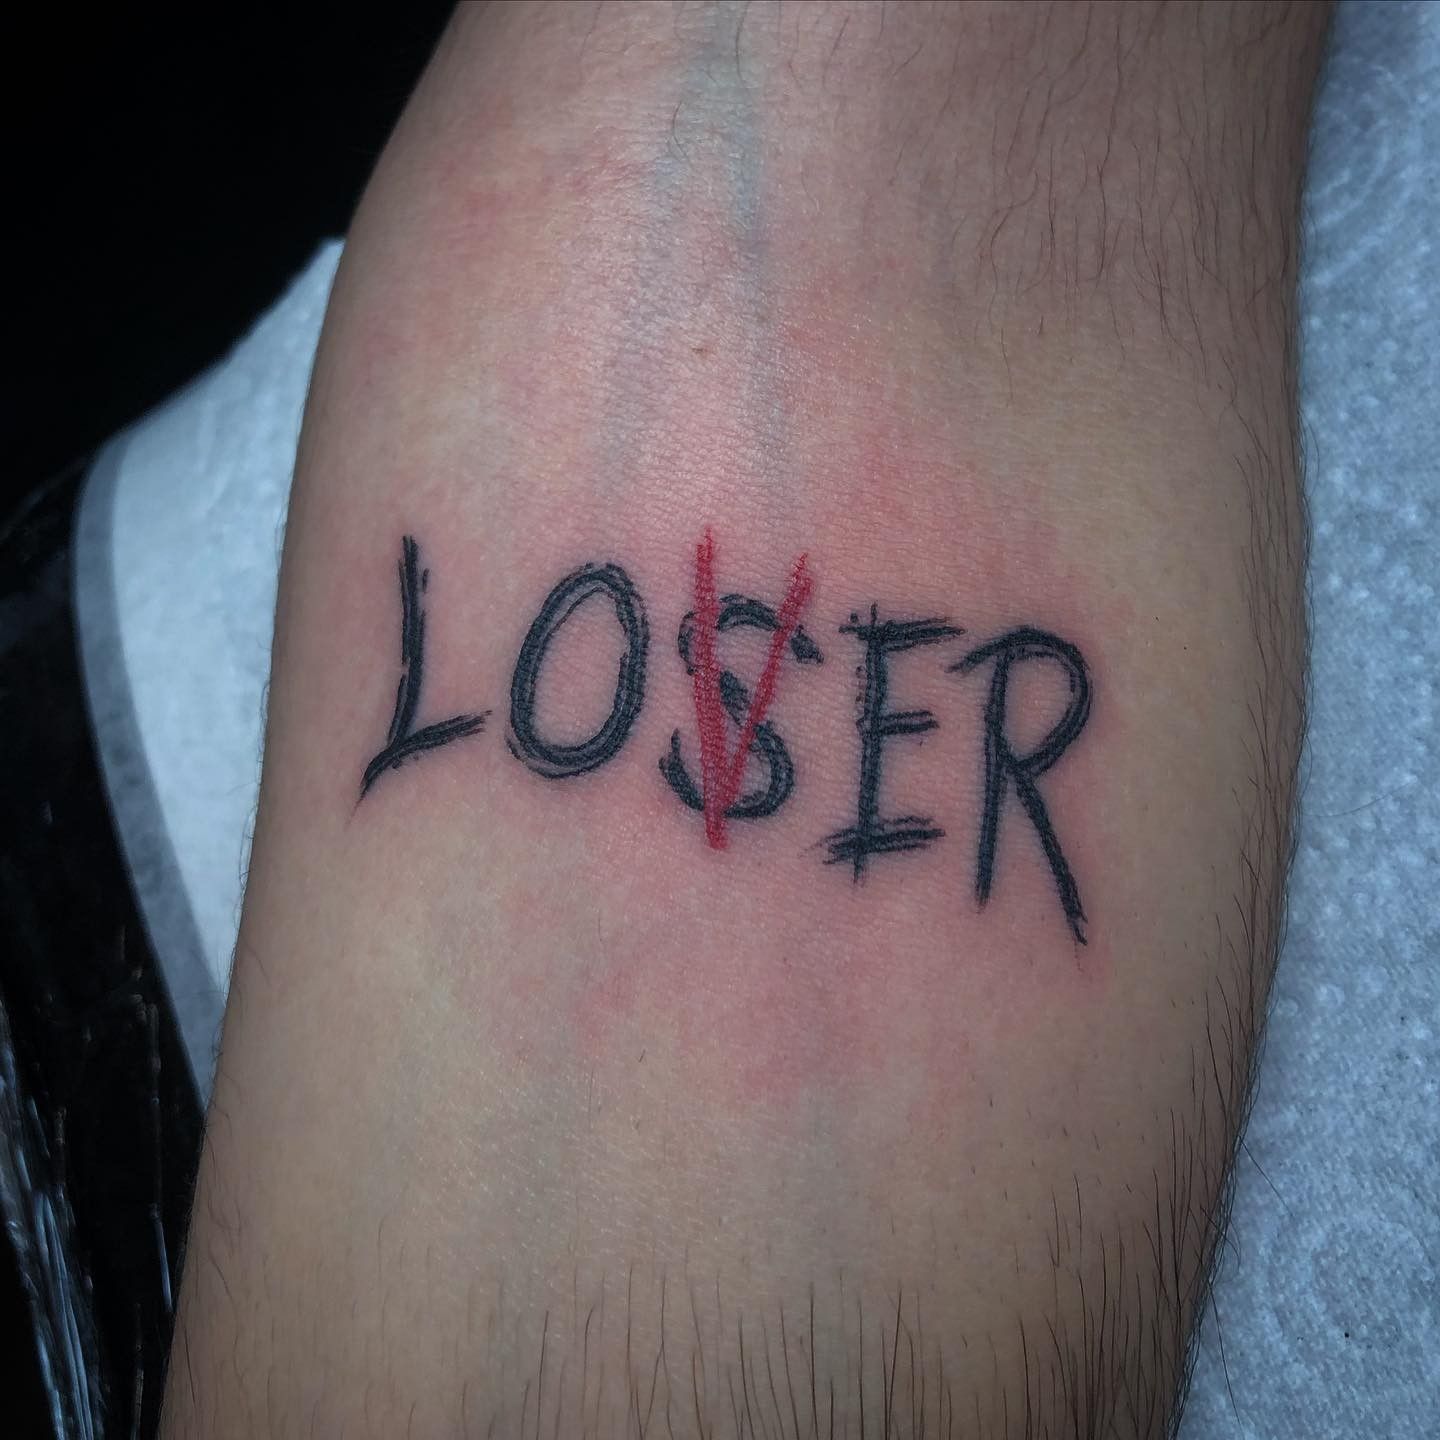 loser, lover and tattoo - image #6490197 on Favim.com